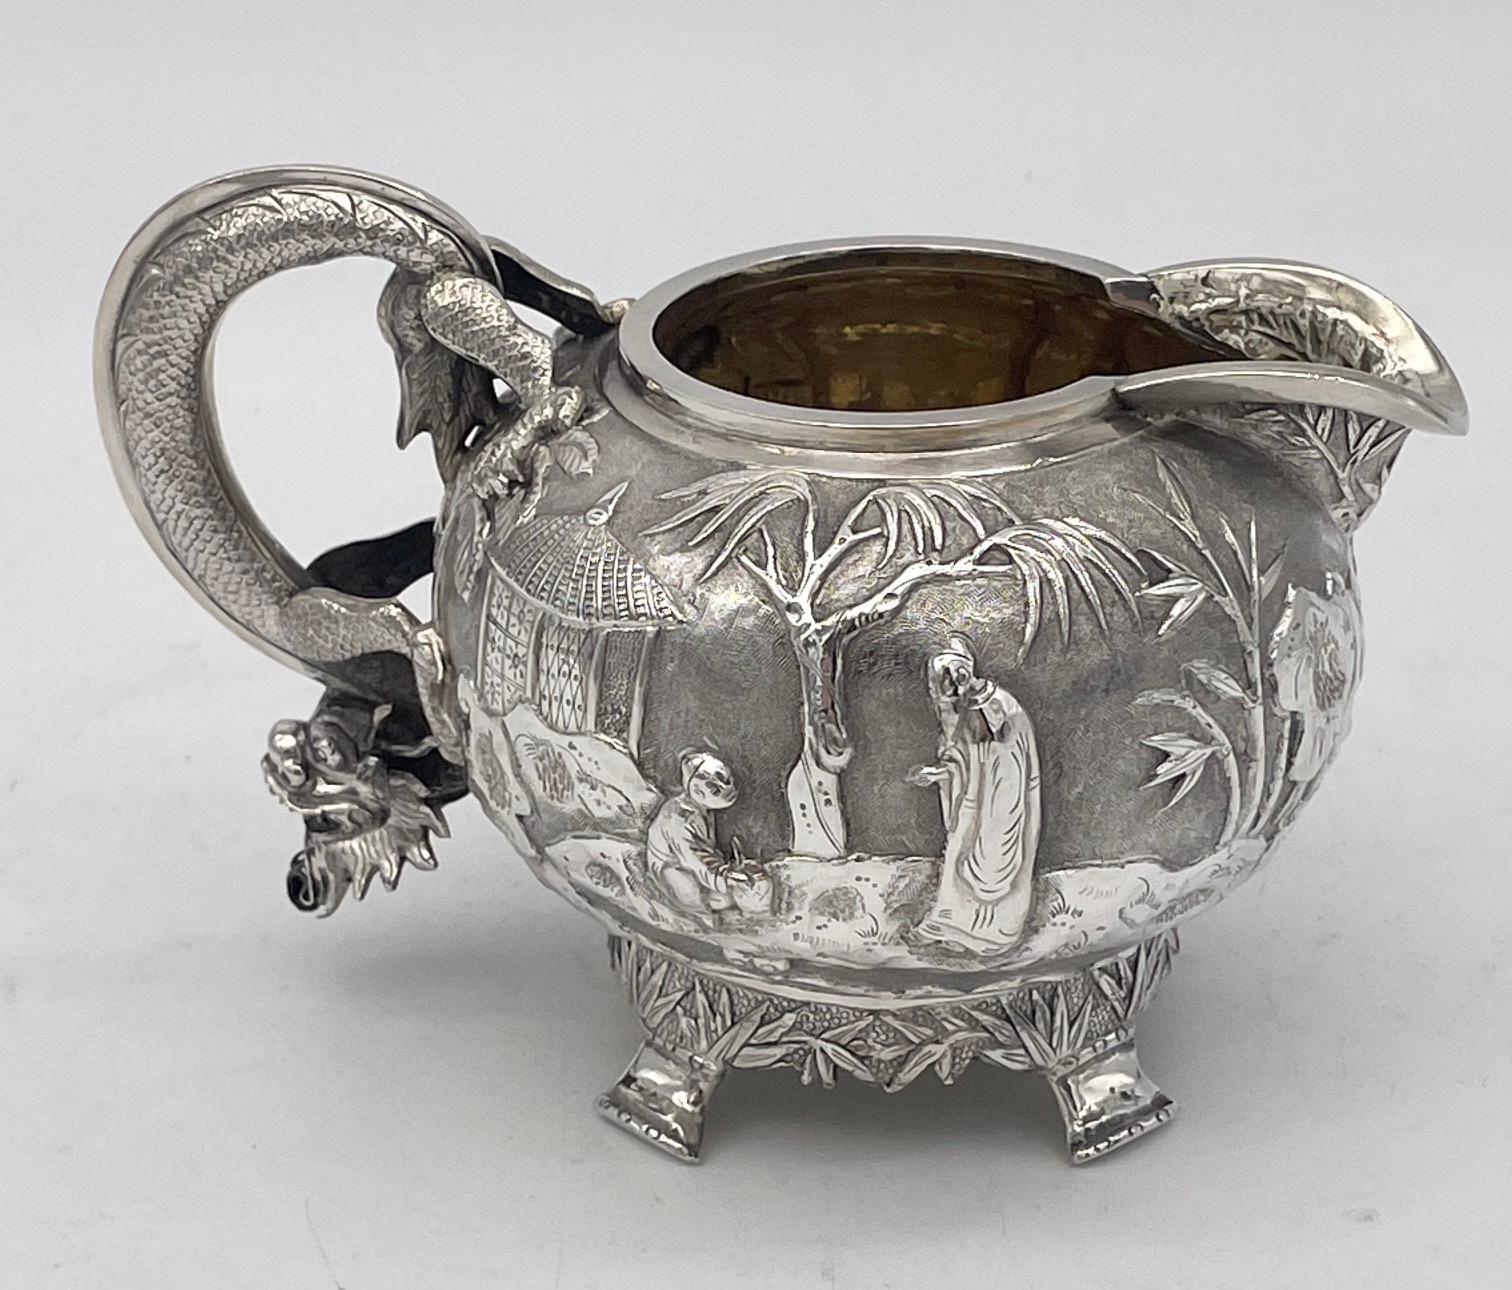 Chinese Export Silver Teaset 10